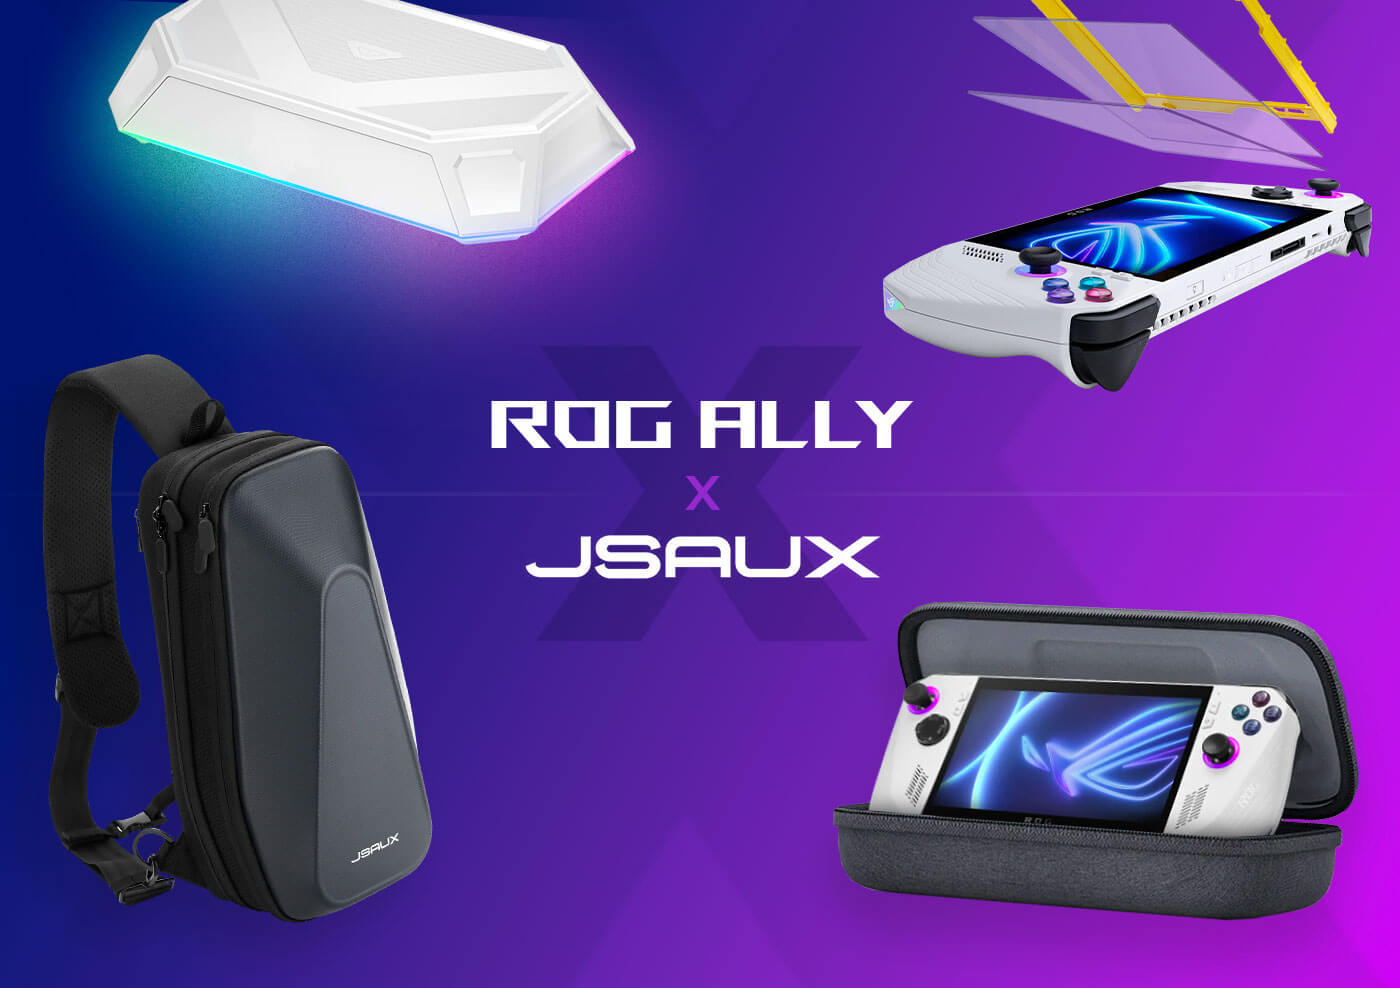 JSAUX Launches a Series of Must-Have Accessories for the ROG Ally, Daily  design inspiration for creatives